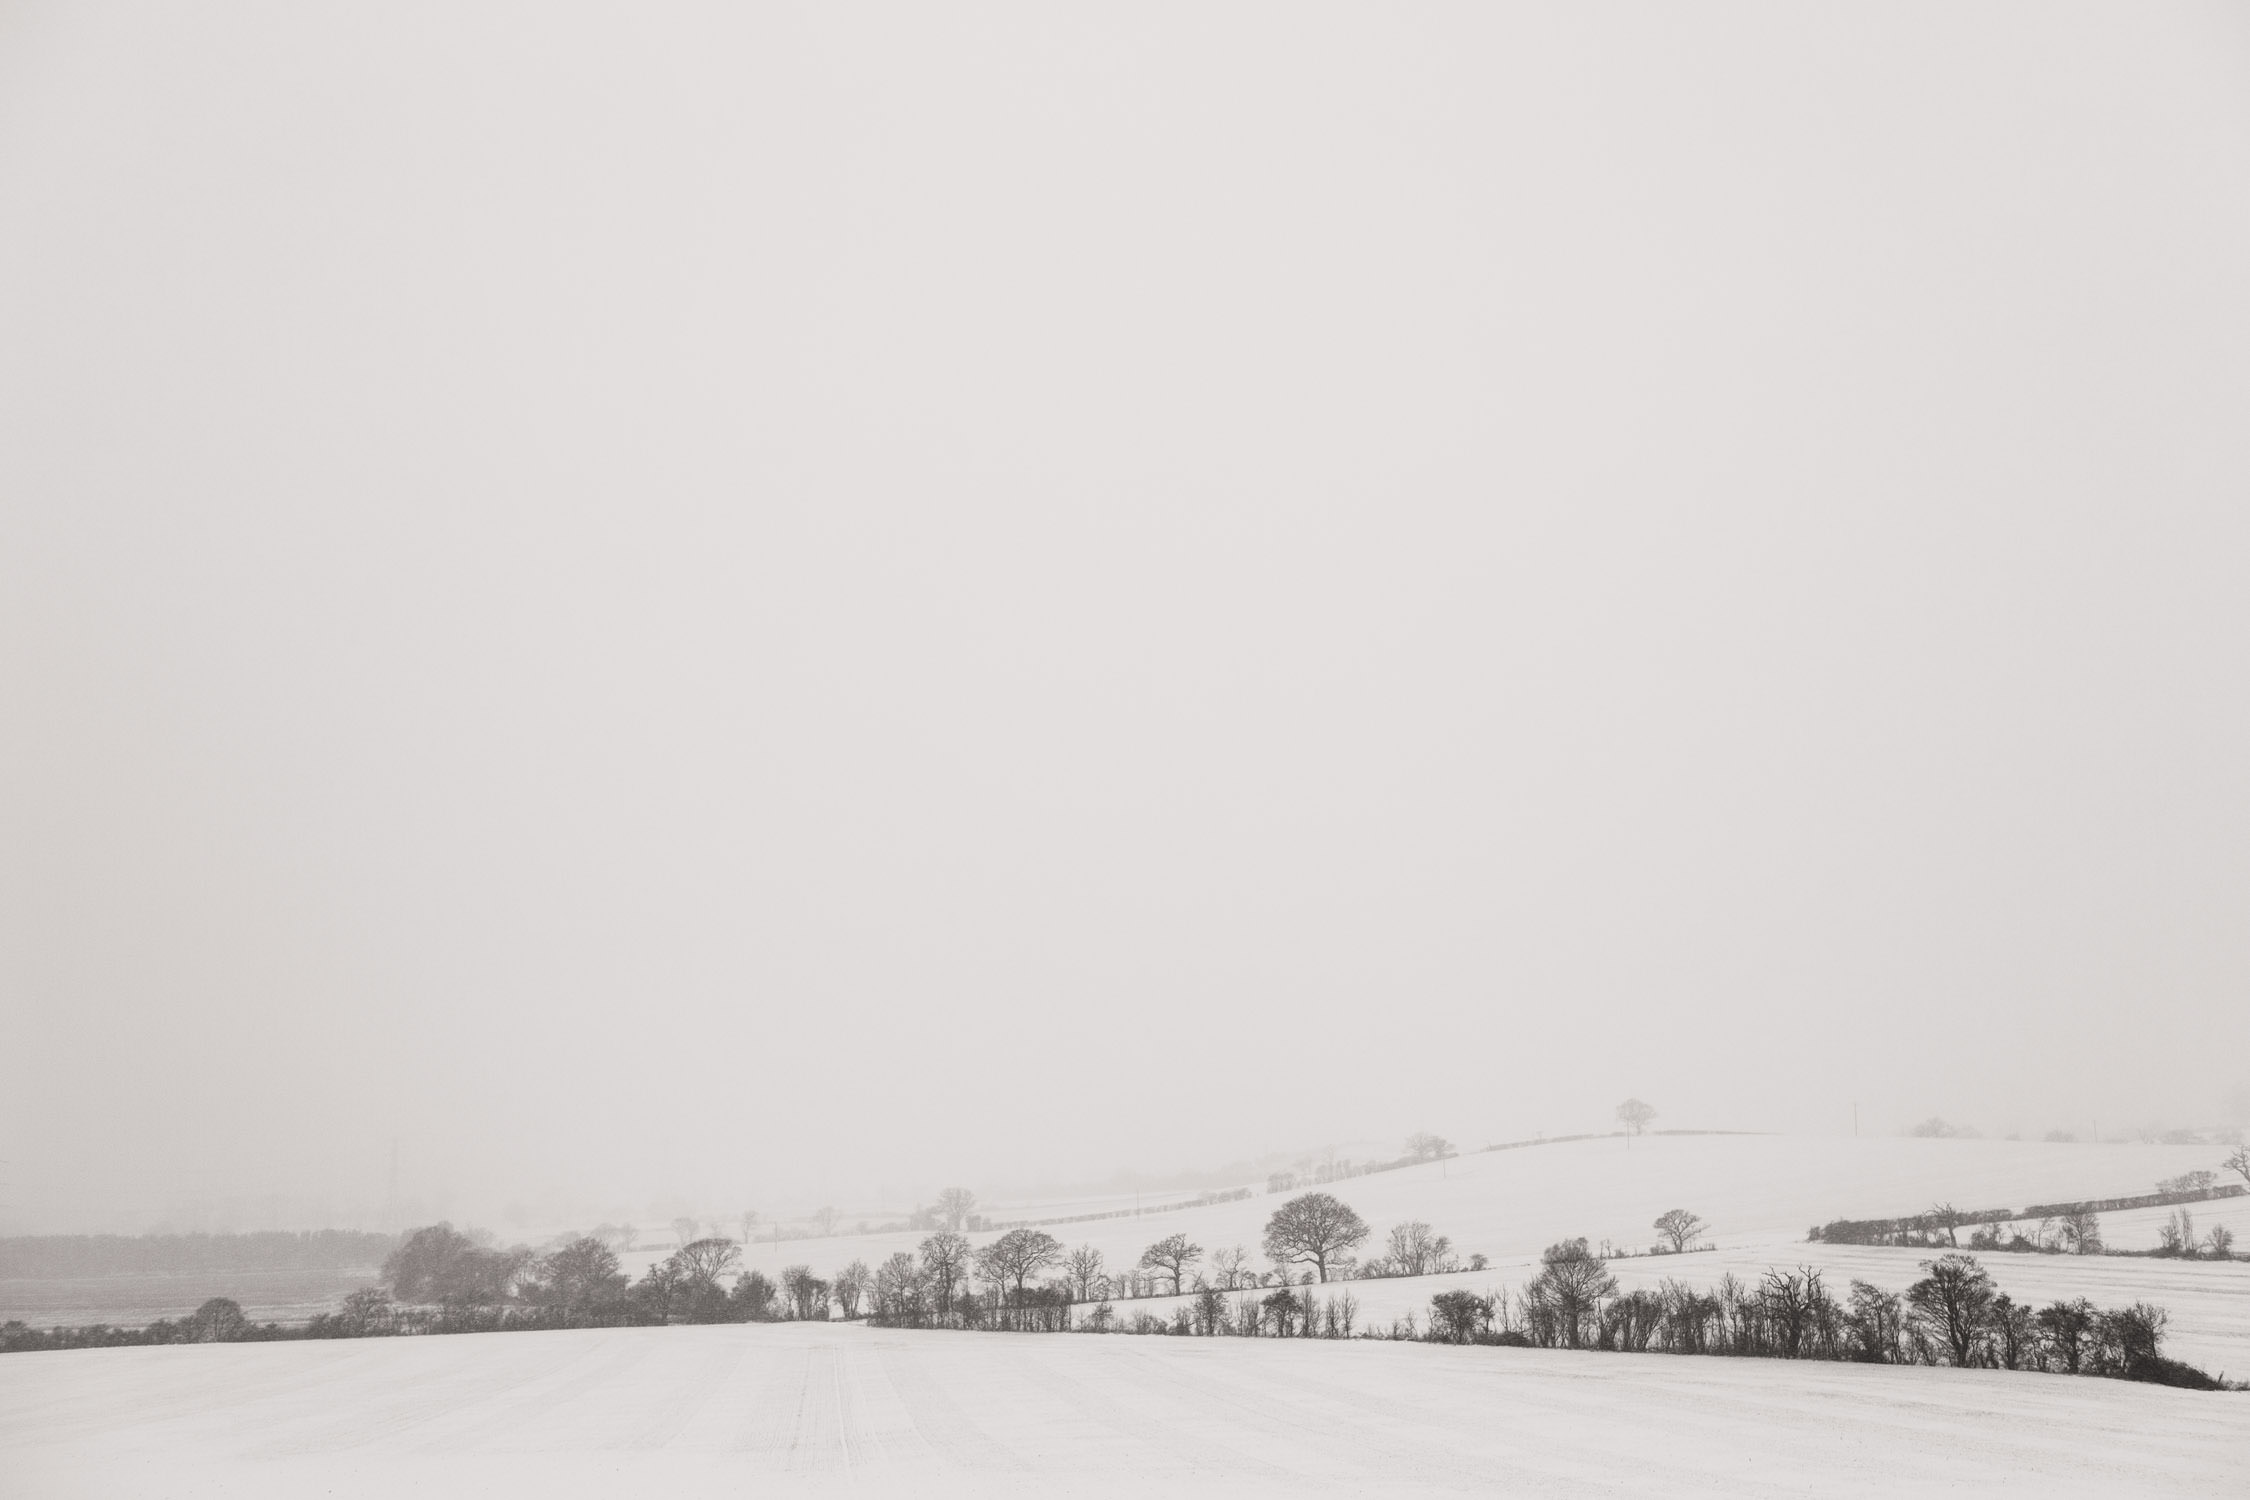 Essex countryside in the snow. Looking at Woodham Ferrers.